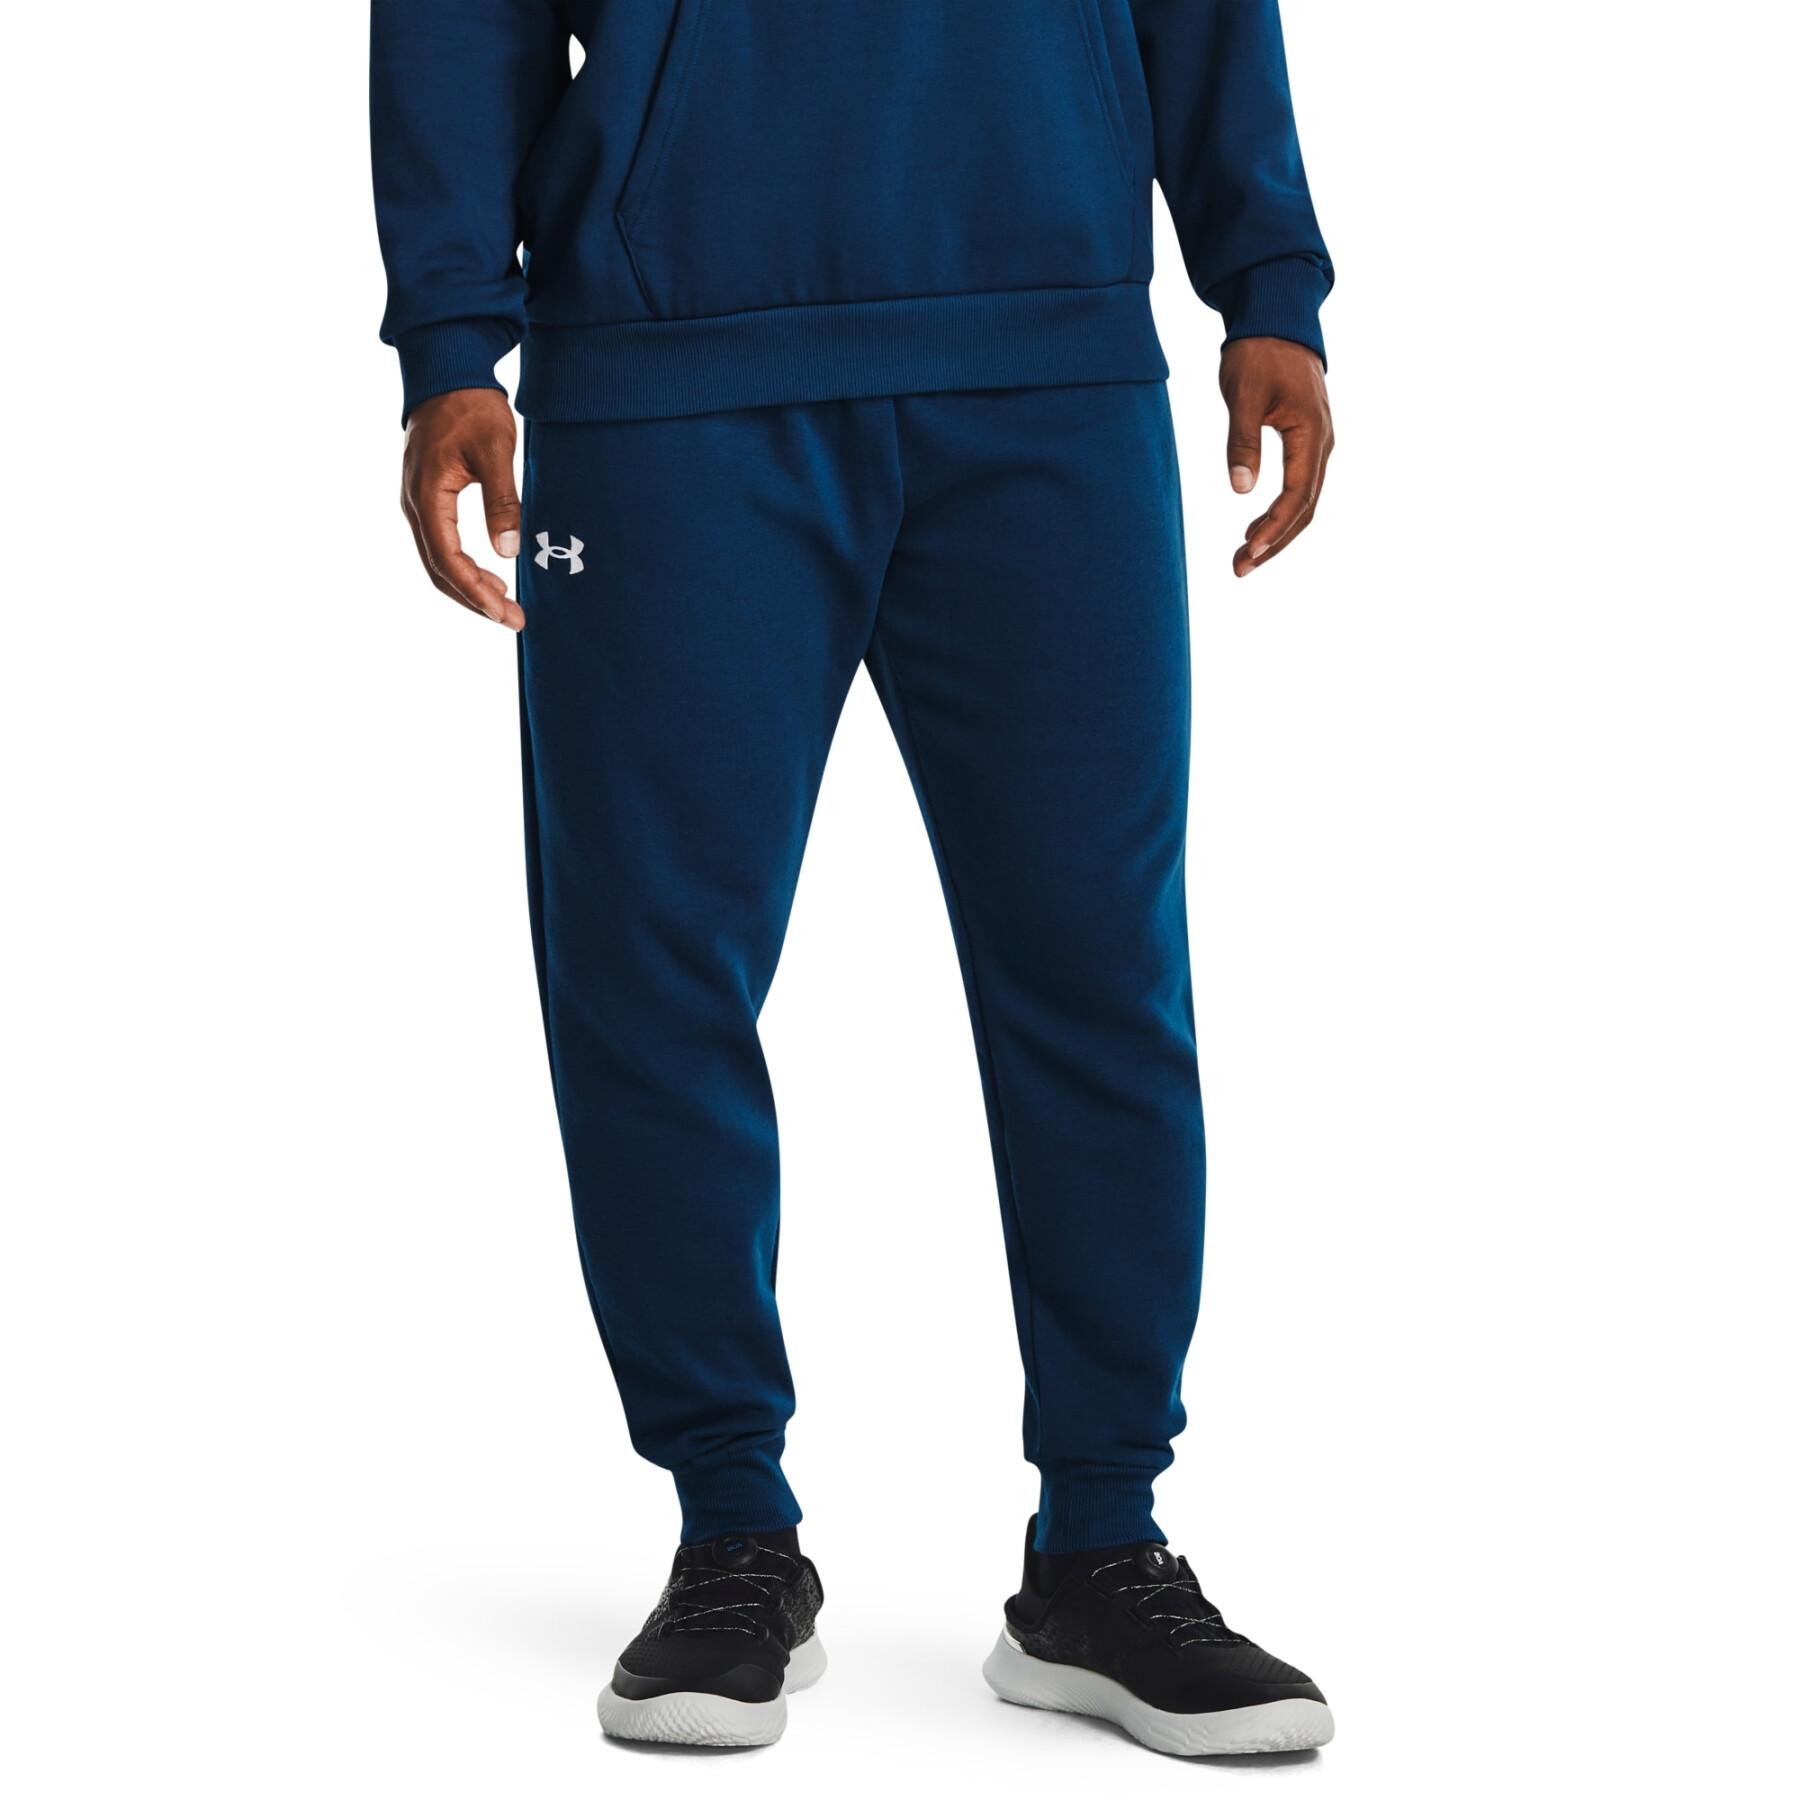 Jogging Under Armour Rival Fleece - Pants / Jogging suits - The Stockings -  Mens Clothing